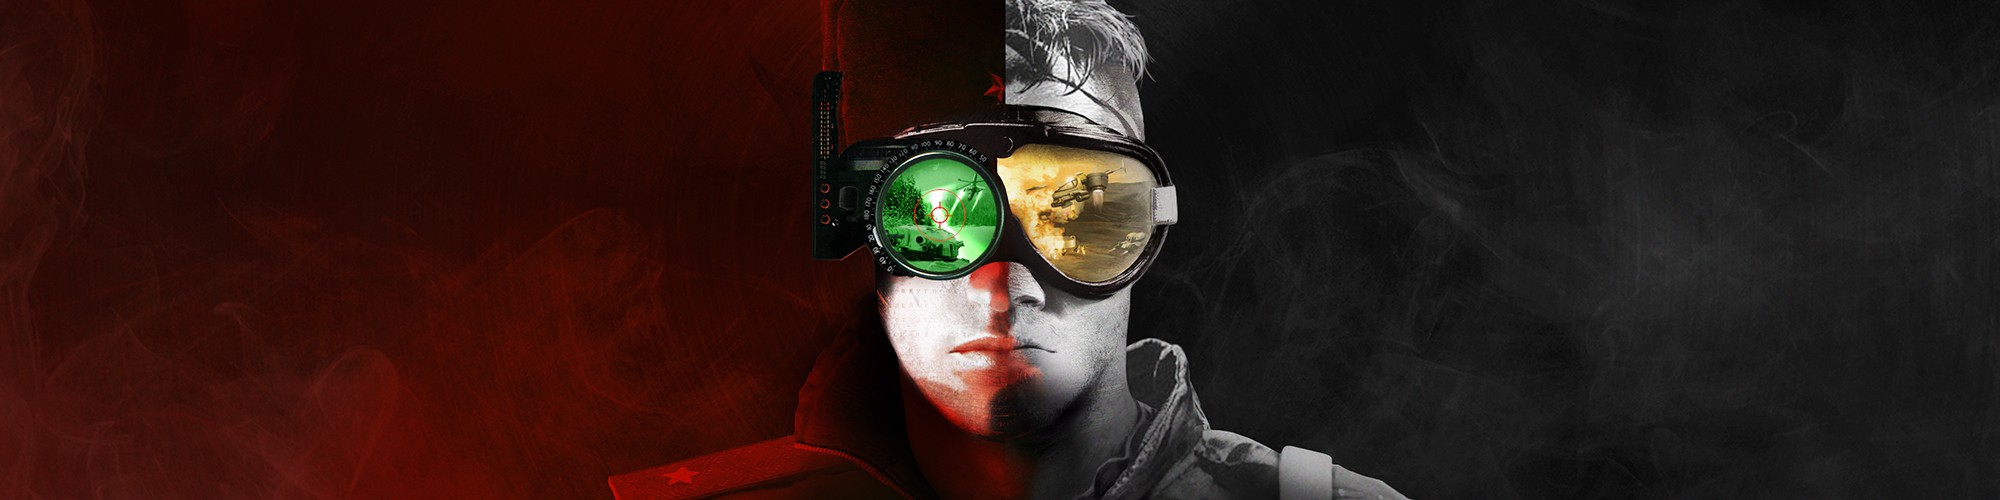 Command & Conquer Remastered Collection technical specifications for laptop